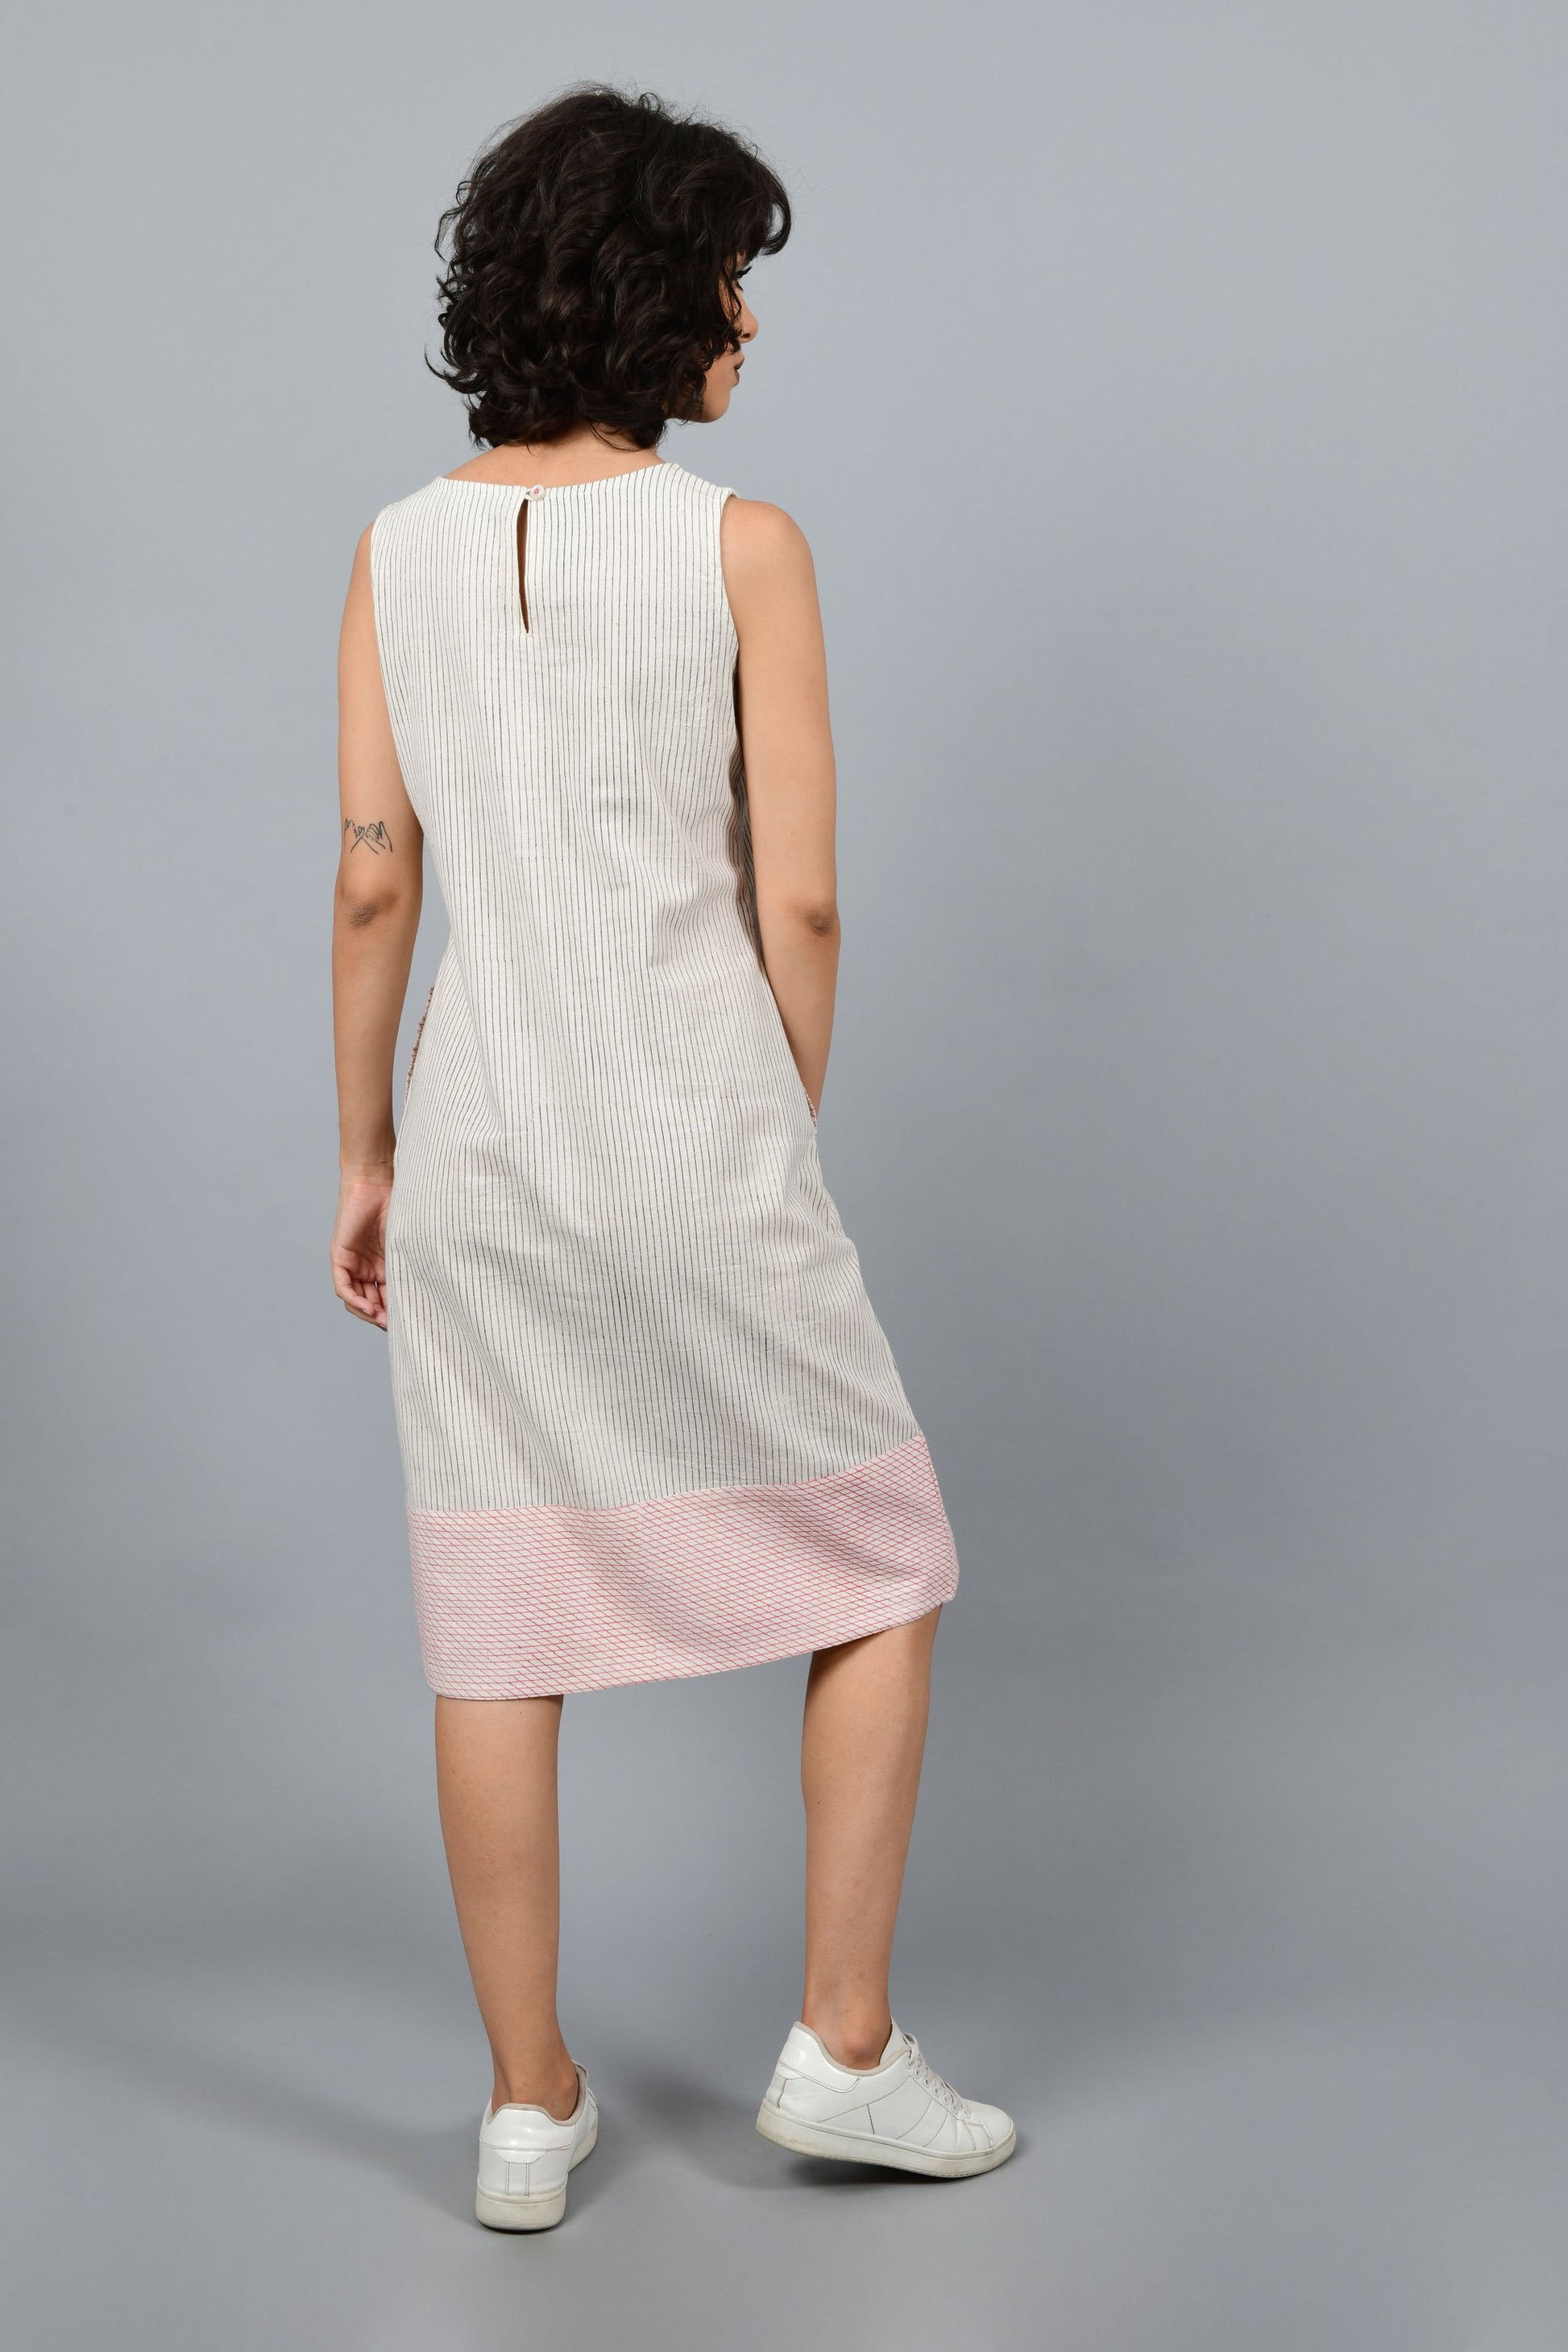 Model wearing black block printed black pin stripes with red checks on the hem on off-white handspun and handwoven khadi cotton sleeveless dress, showing the back.